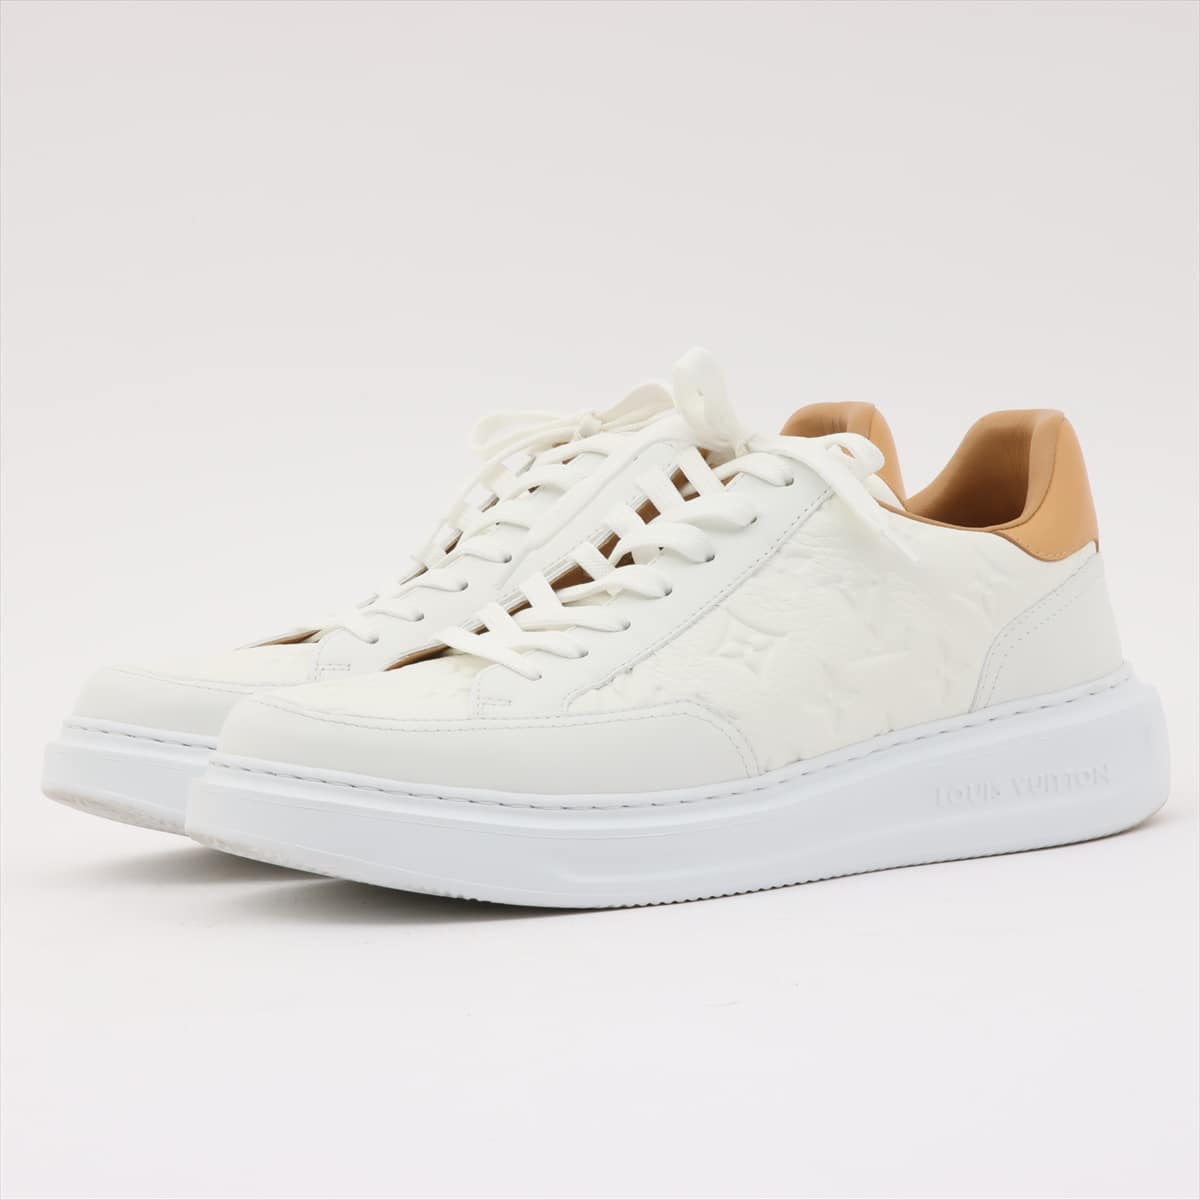 Louis Vuitton Beverly Hills Line 22 years Leather Sneakers 7 Men's White LD0212 Monogram Is there a replacement string